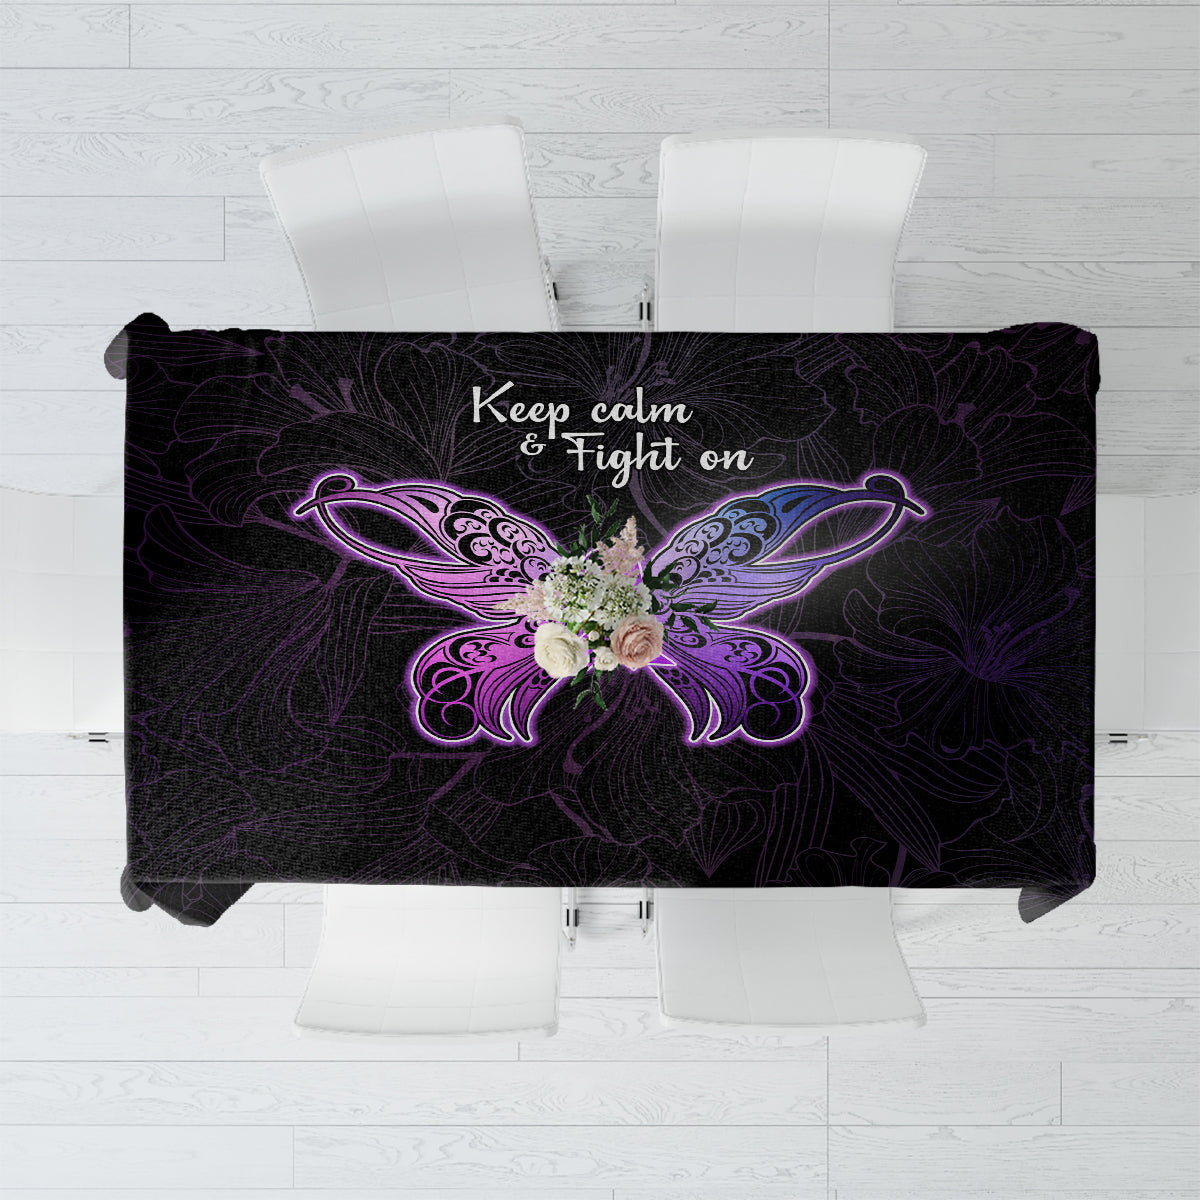 Pancreatic Cancer Awareness Tablecloth Keep Calm And Fight On Polynesian Pattern LT05 Purple - Polynesian Pride